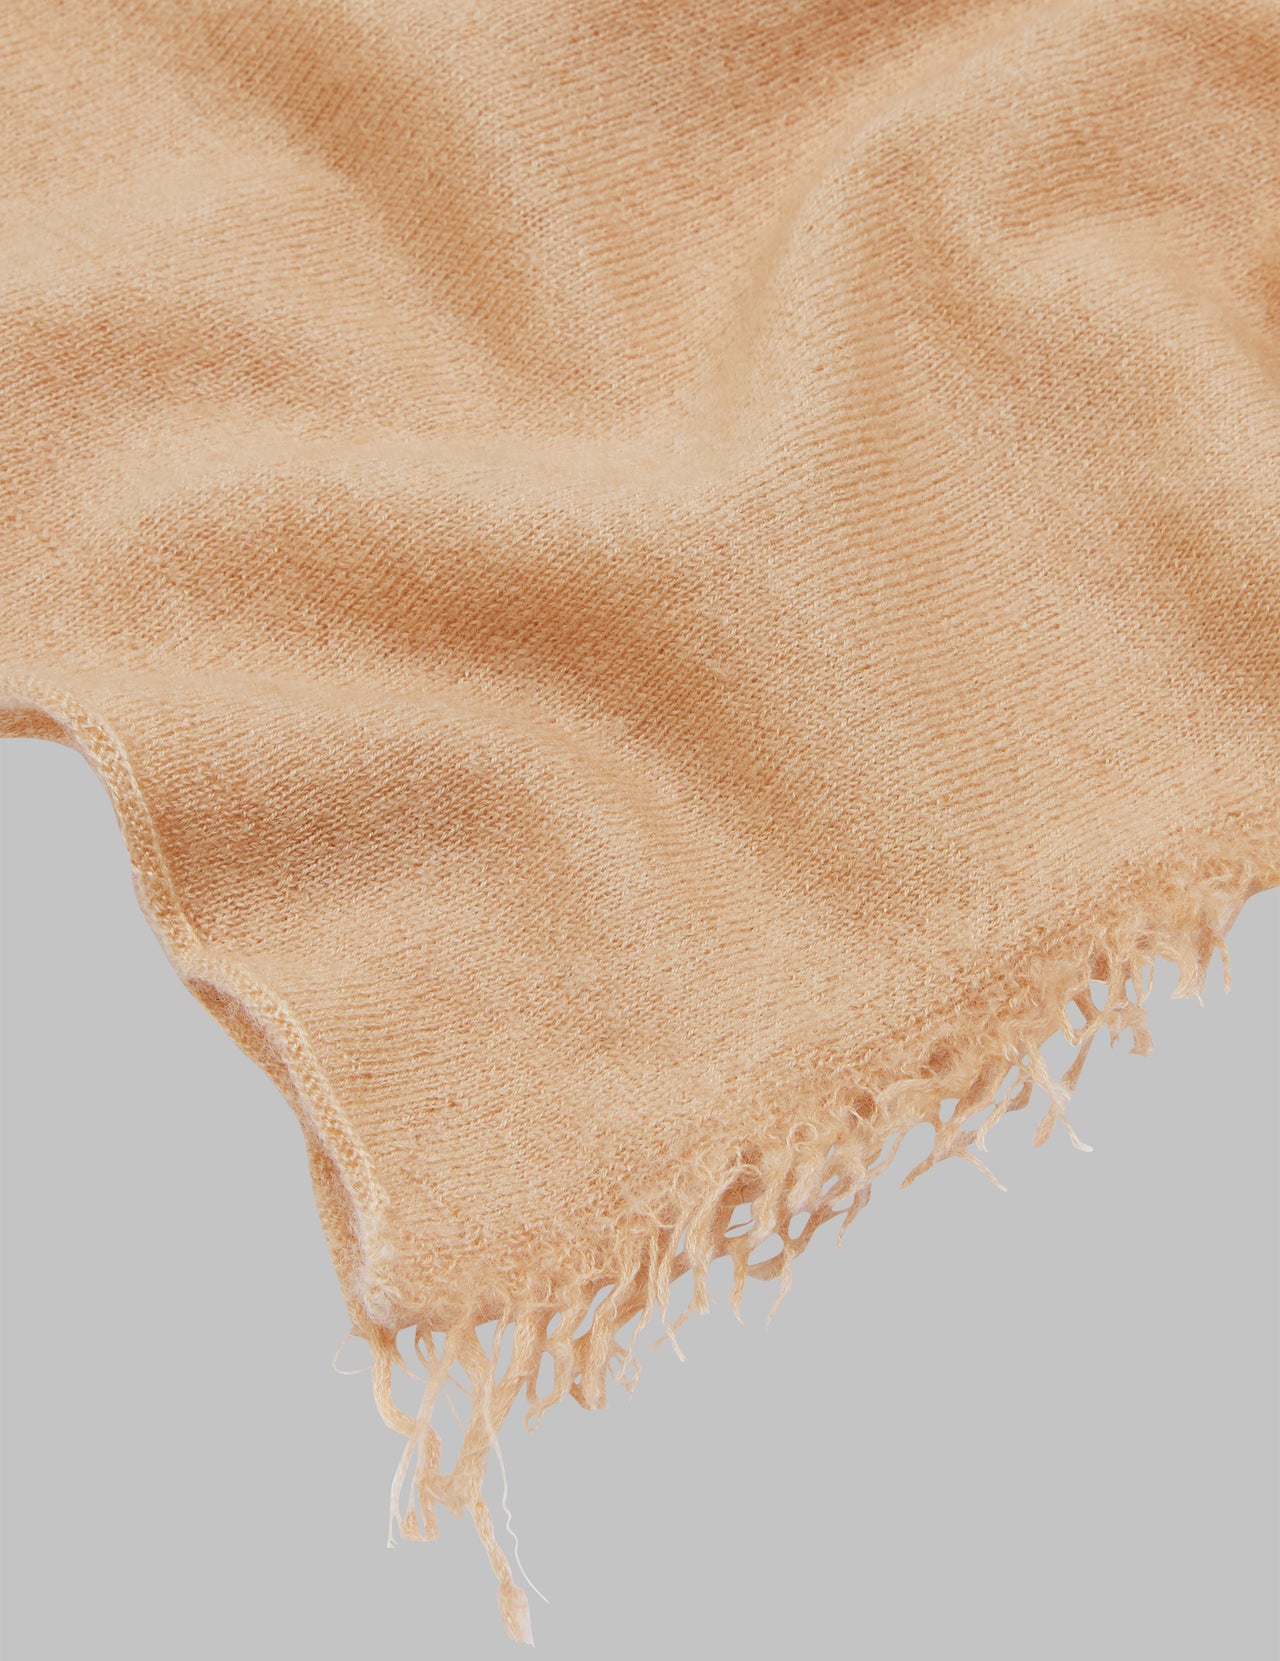  Honey Handwoven Felted Cashmere Stole 